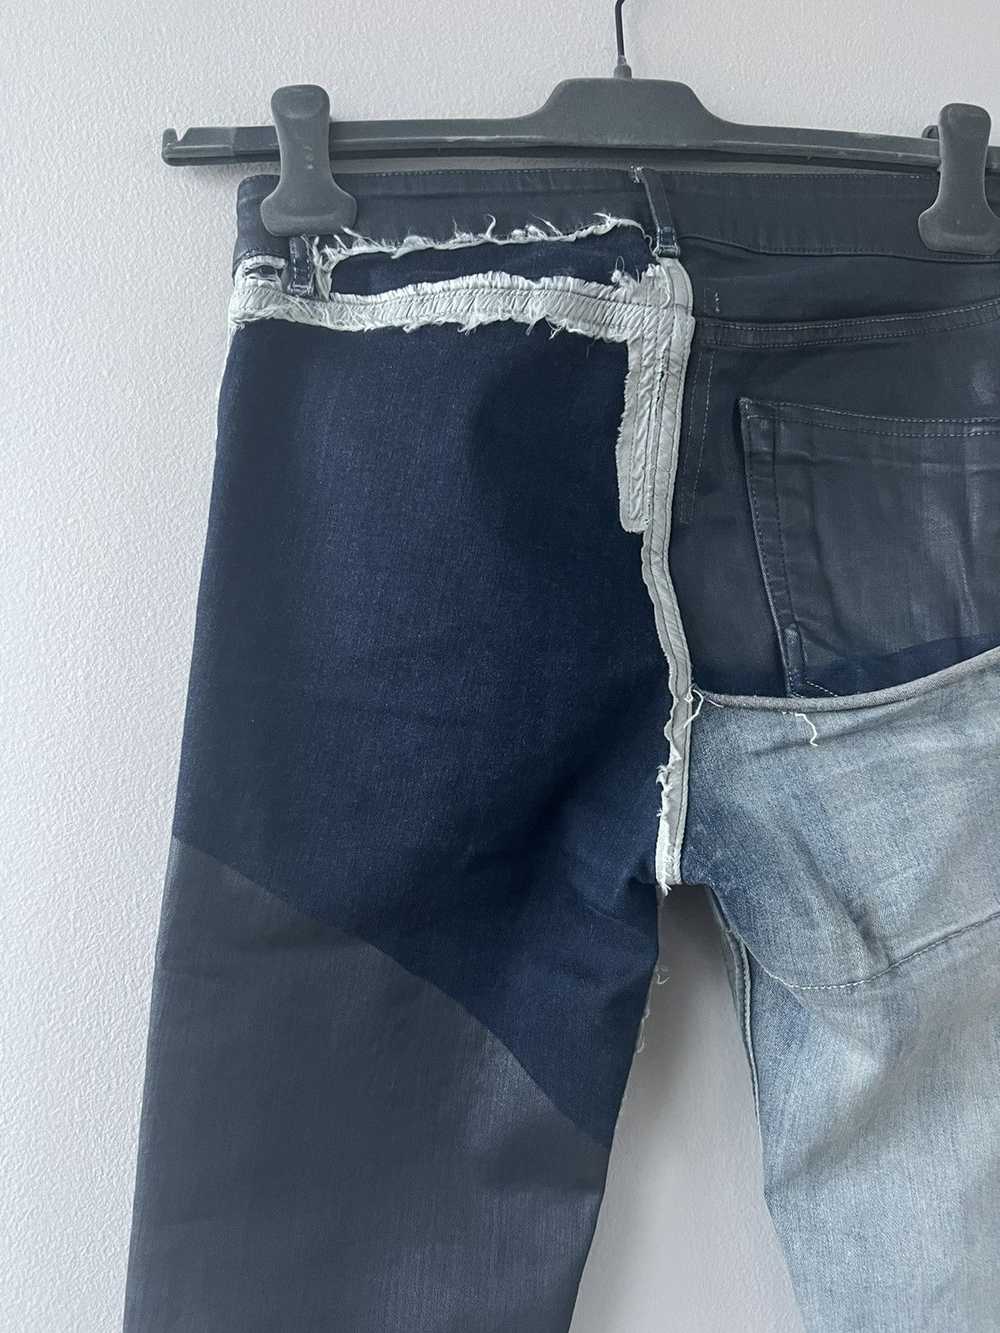 Rick Owens SS19 BABEL Combo Tyrone Jeans - image 6